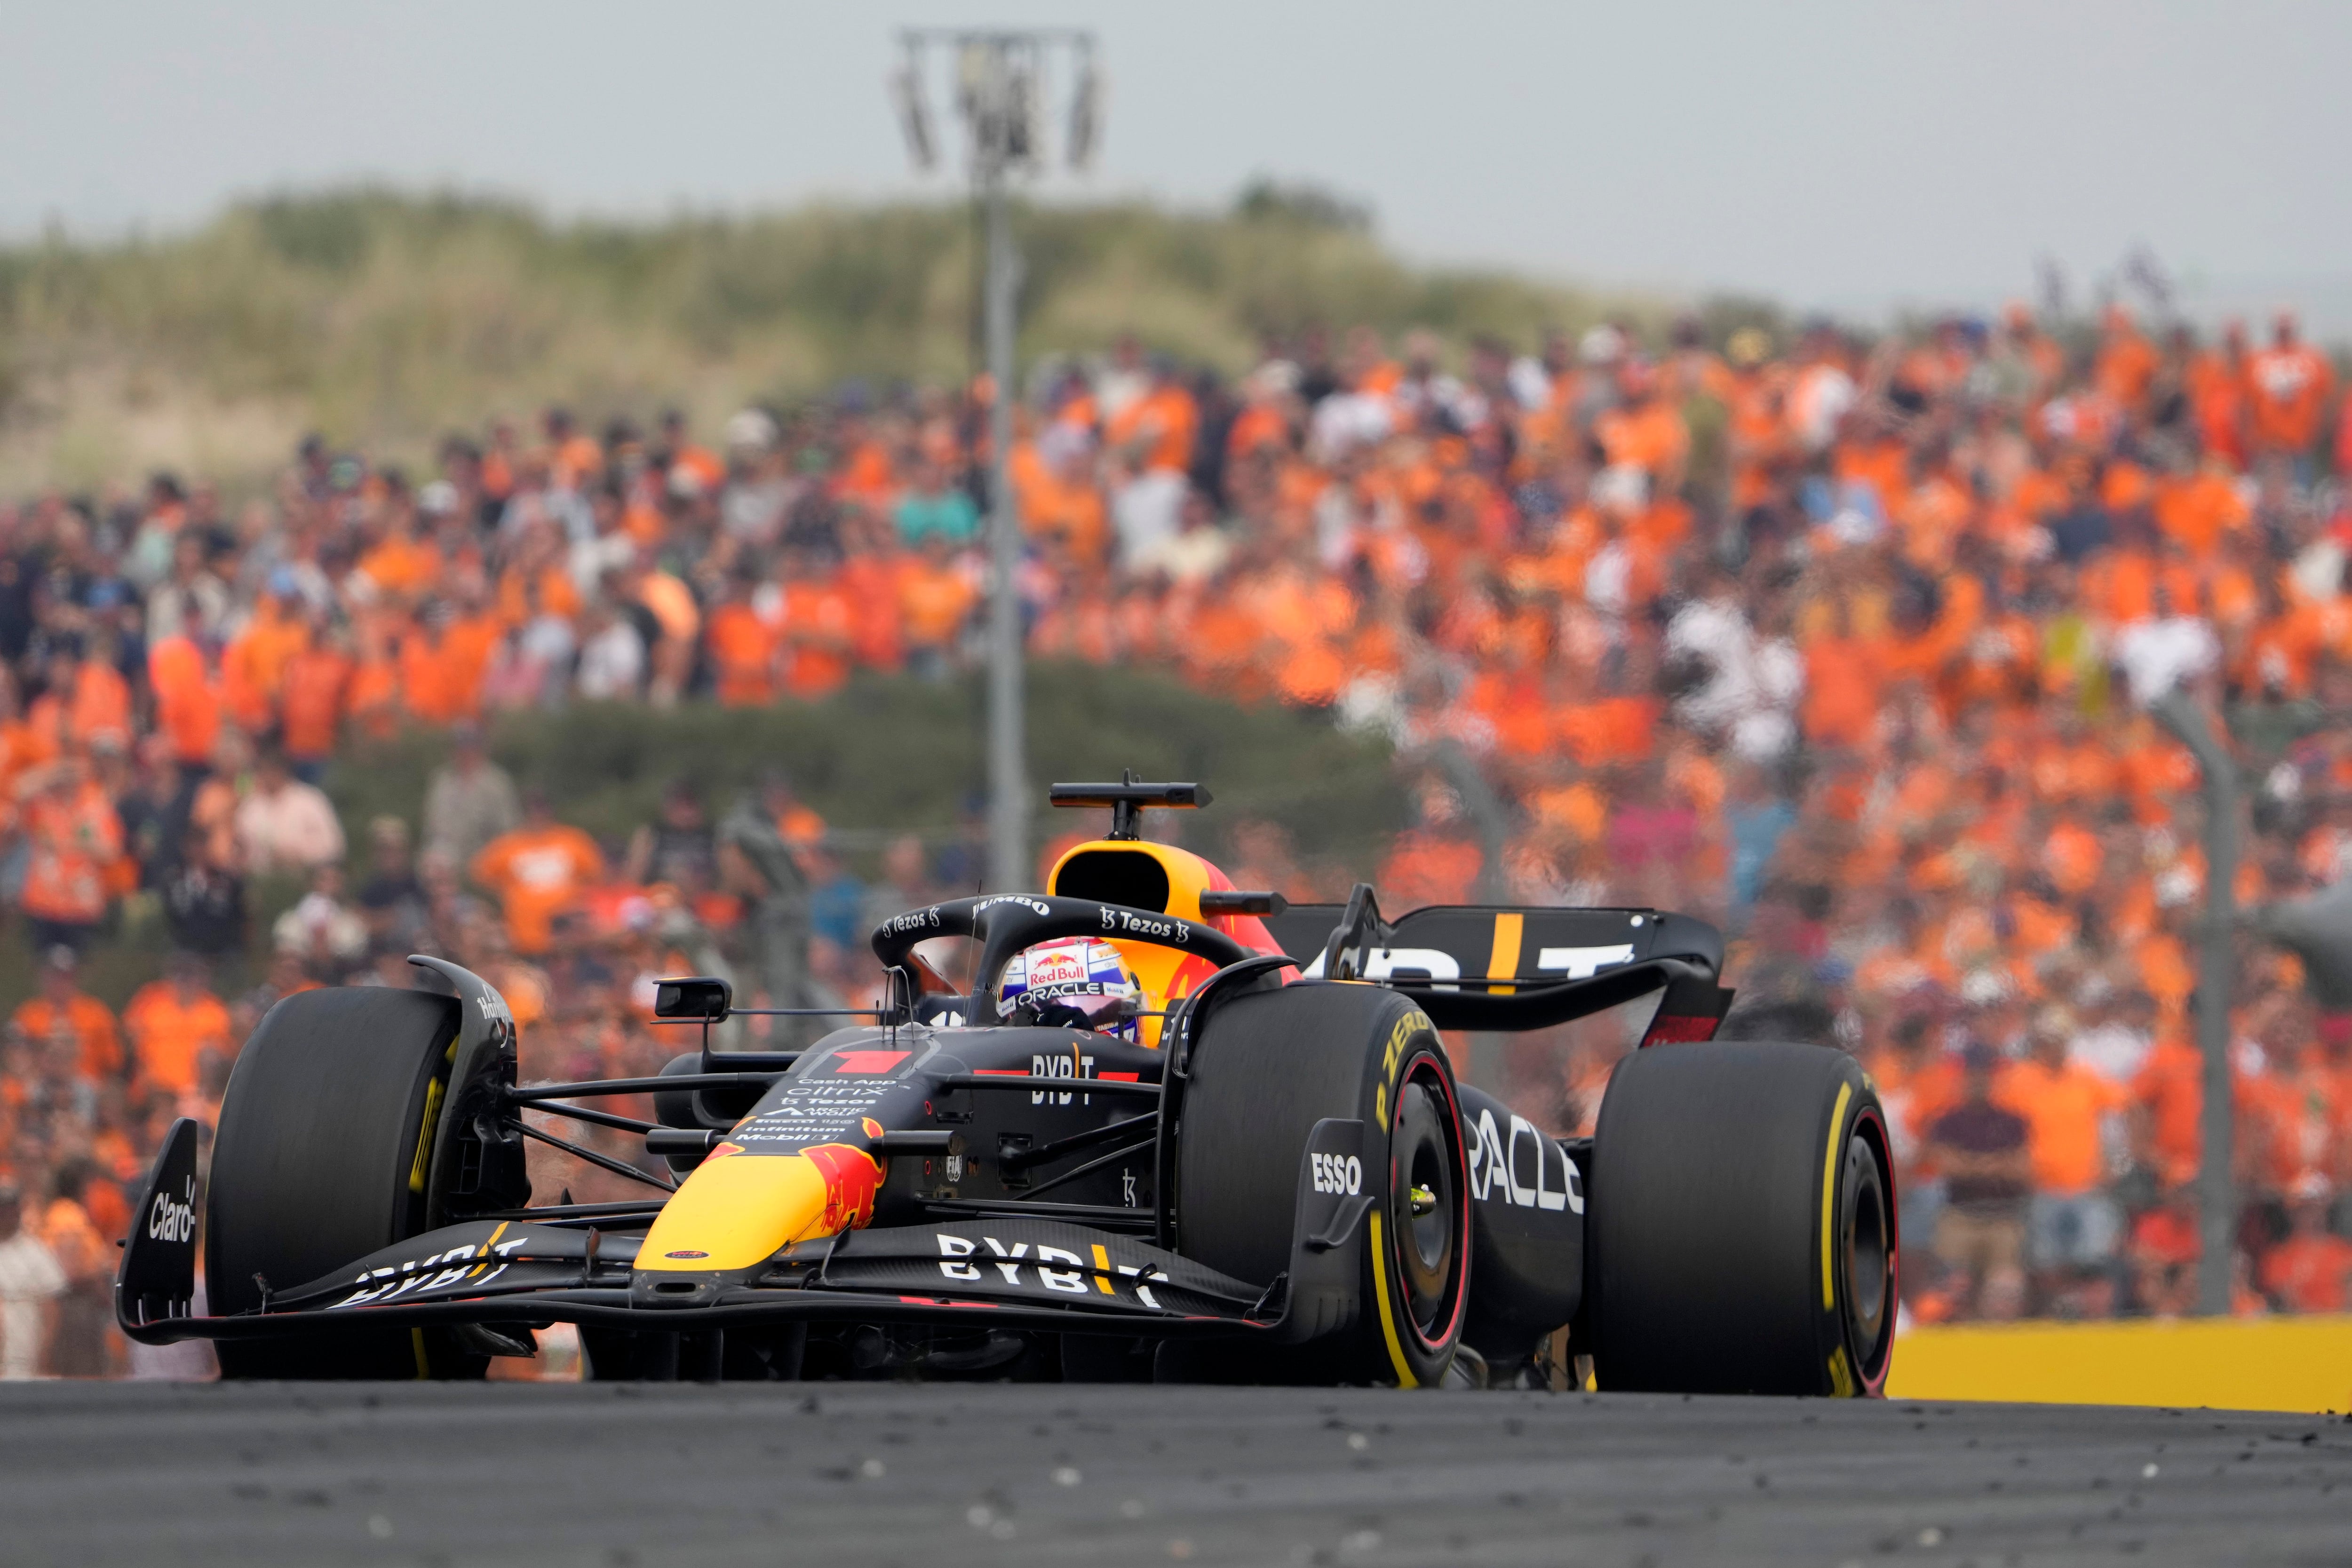 Max Verstappen's title march boring? Try telling that to his Orange Army